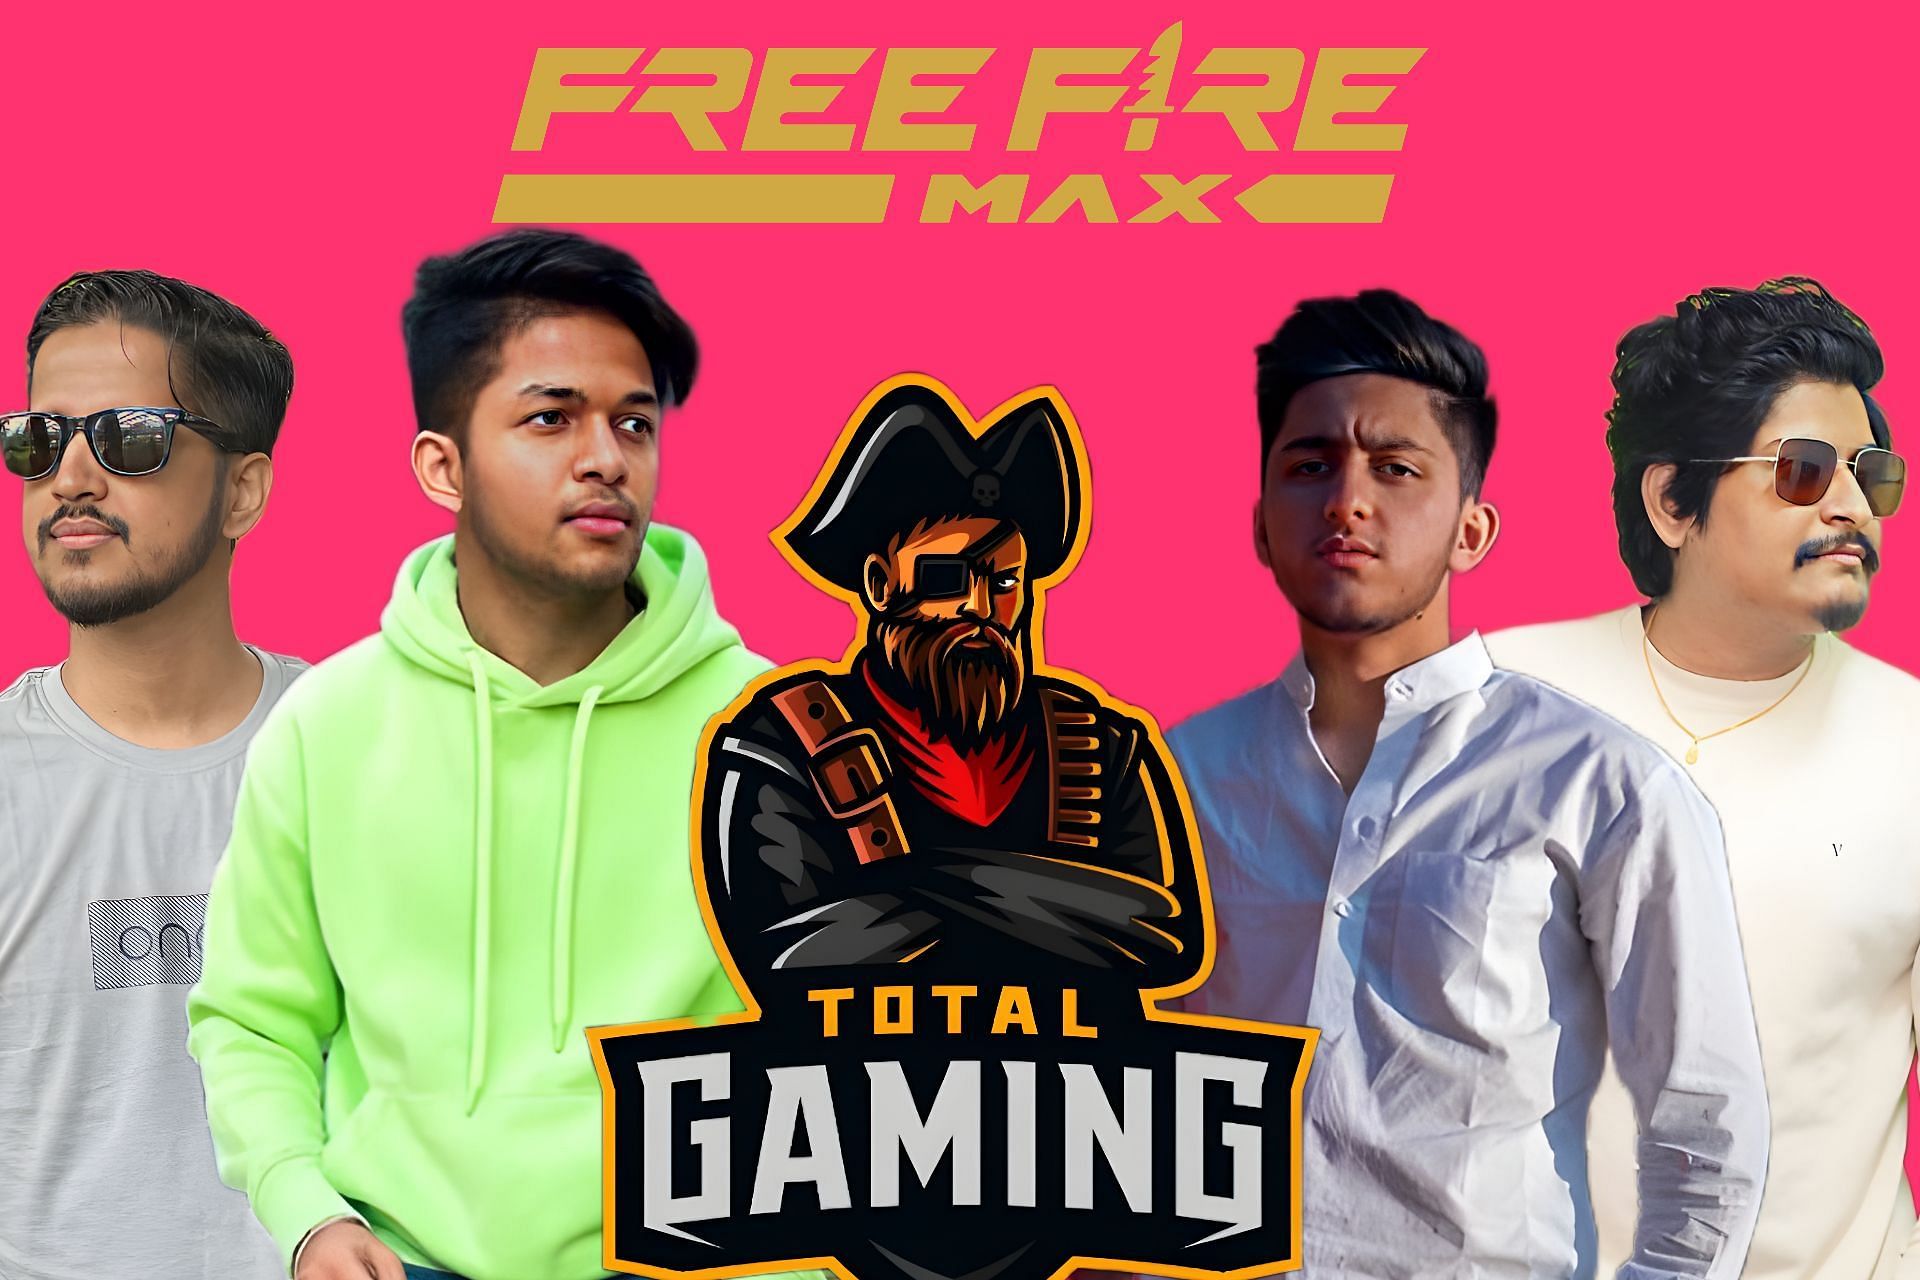 Top 5 most subscribed-to Indian Free Fire MAX rs in 2022